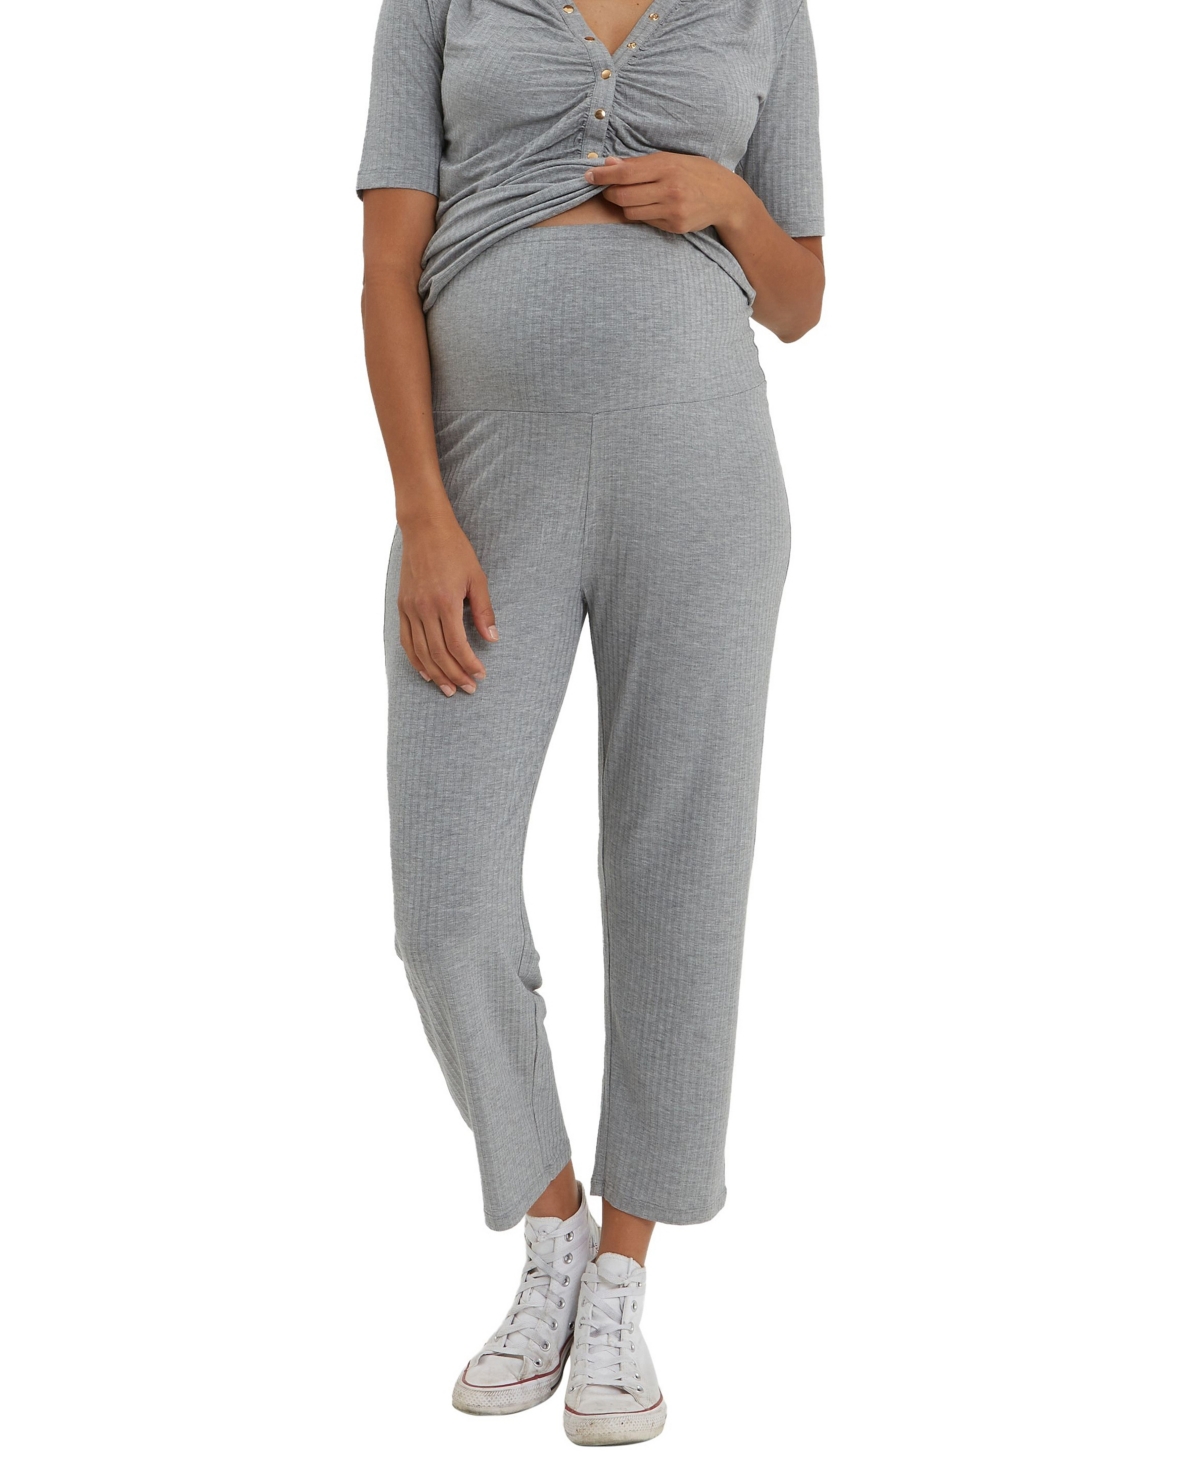 NOM MATERNITY WOMEN'S CAMILLA OVER-THE-BELLY MATERNITY PANTS